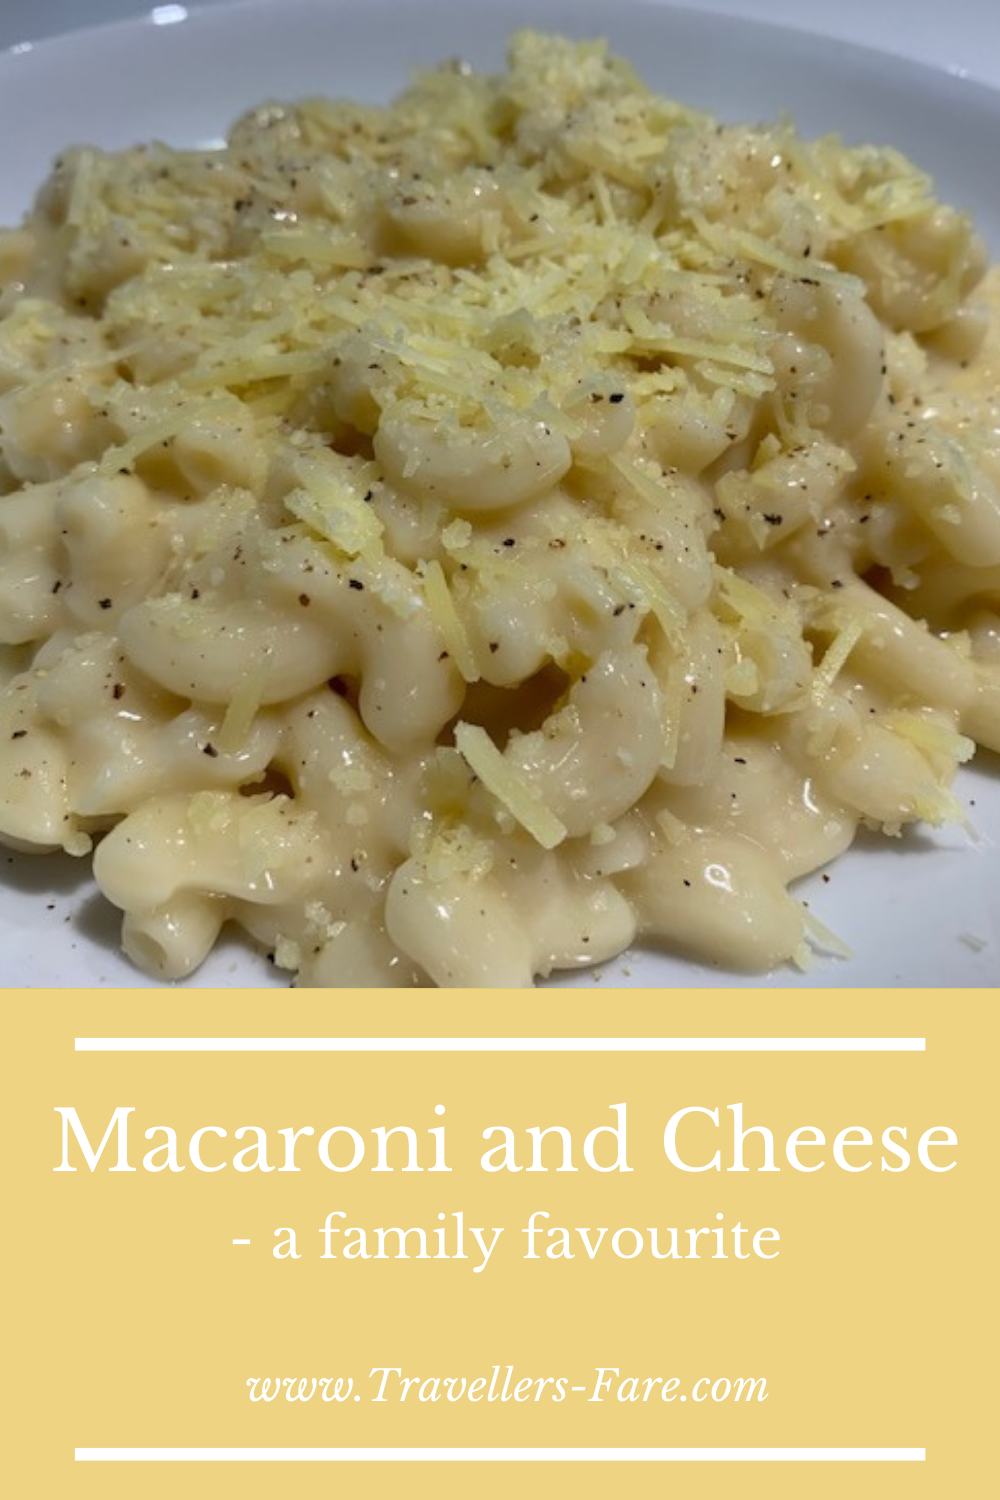 Macaroni and Cheese Is Made From Small Elbow Pasta Cooked In A Creamy Sauce.